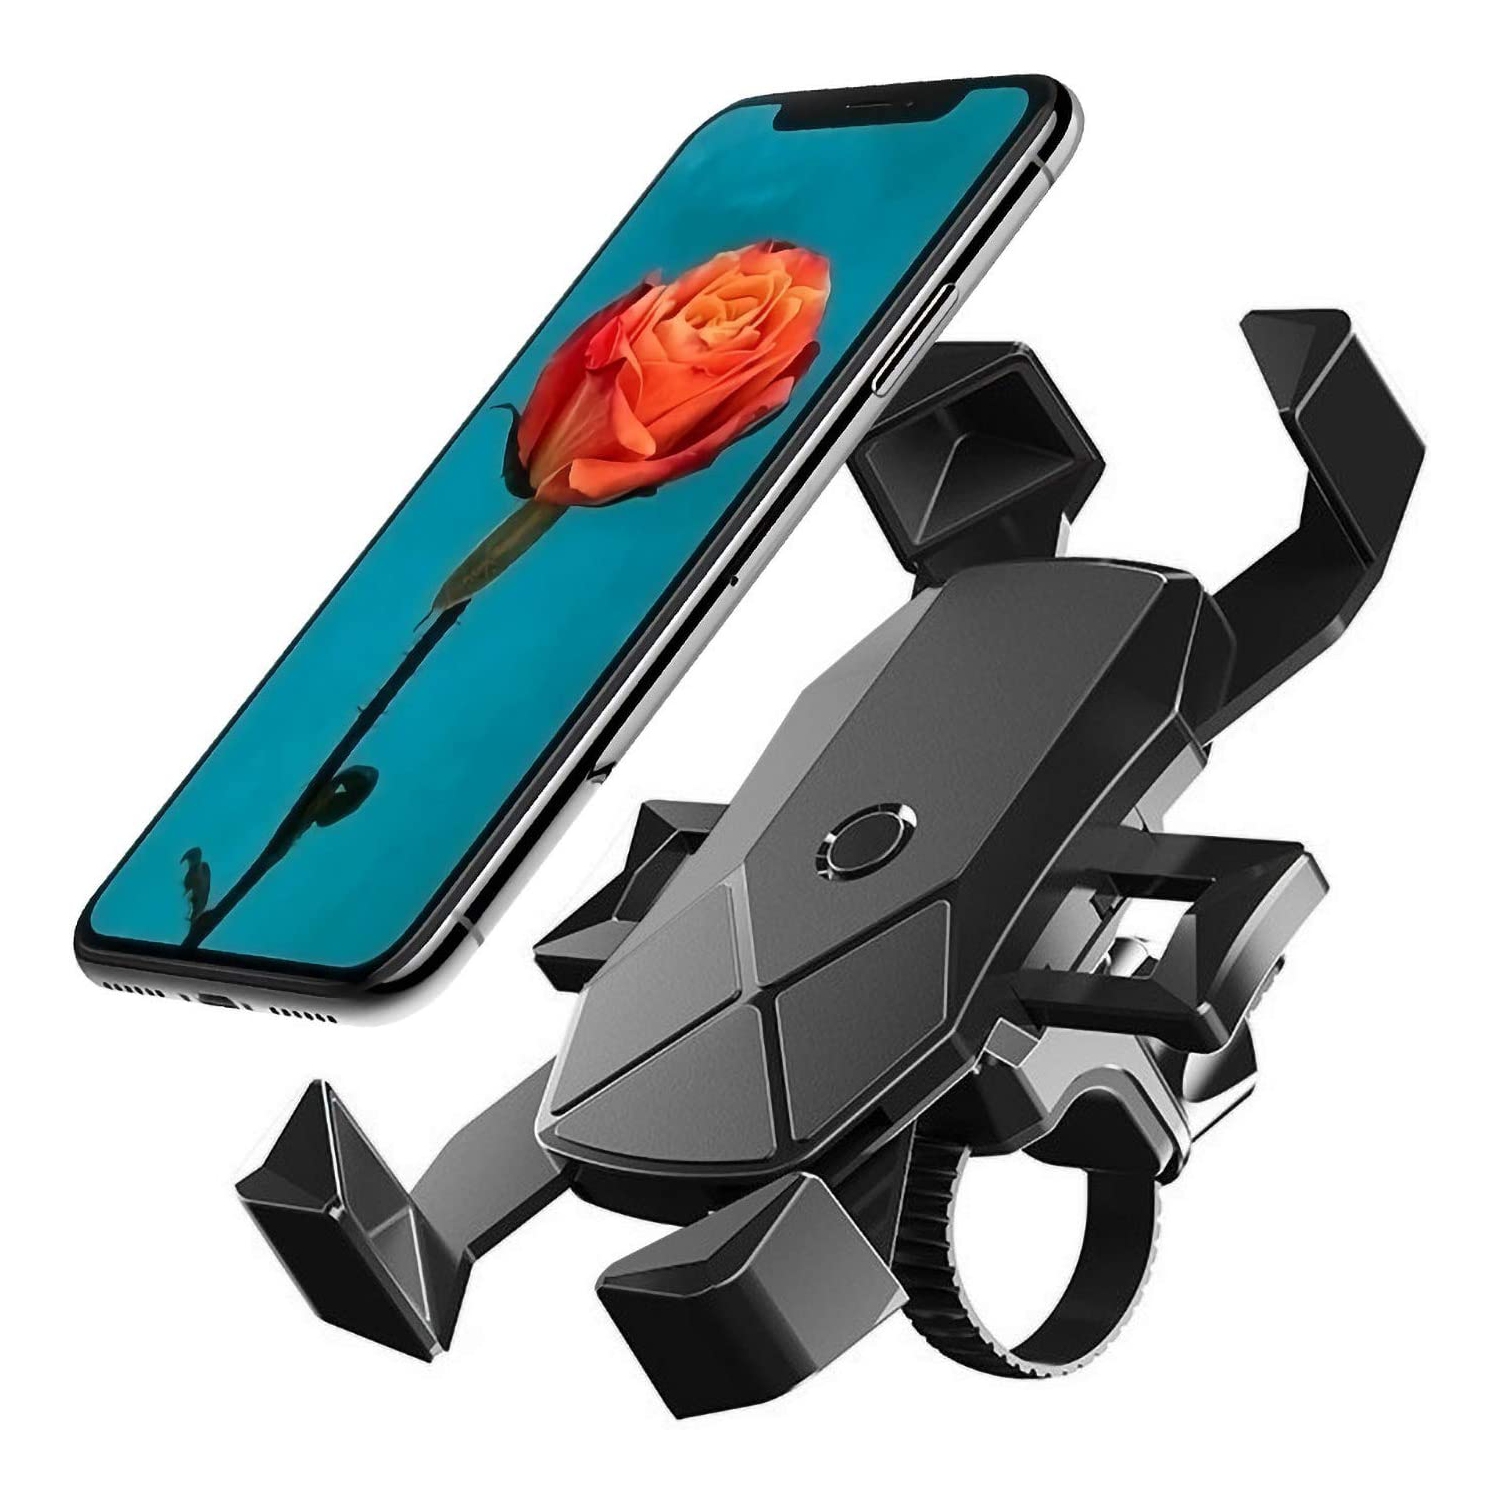 Bike Phone Mount Motorcycle 360° Rotation Bicycle Cell Phone Holder Compatible with iPhone 11/11 Pro Max/XR/X/6/7/8 Plus, Samsung Galaxy Note 10 Plus/S20 Ultra/S10, 4.7 to